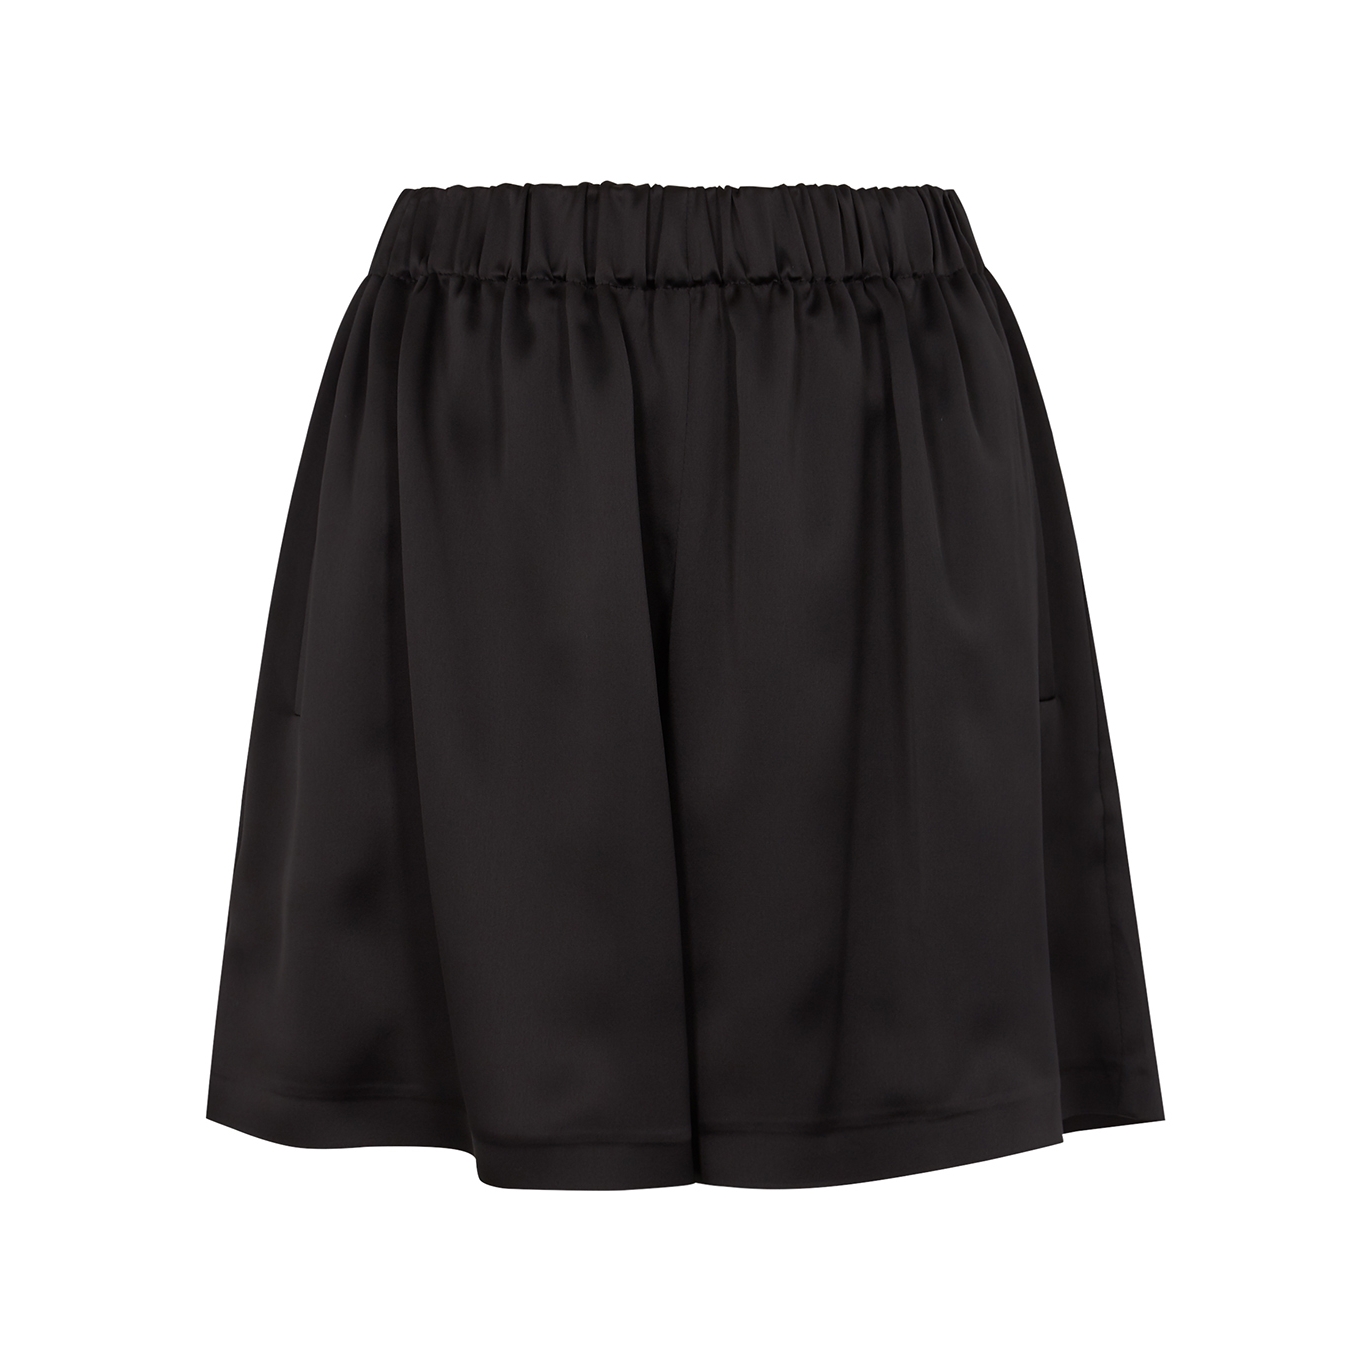 IN The Mood For Love Rohmer Black Satin Shorts